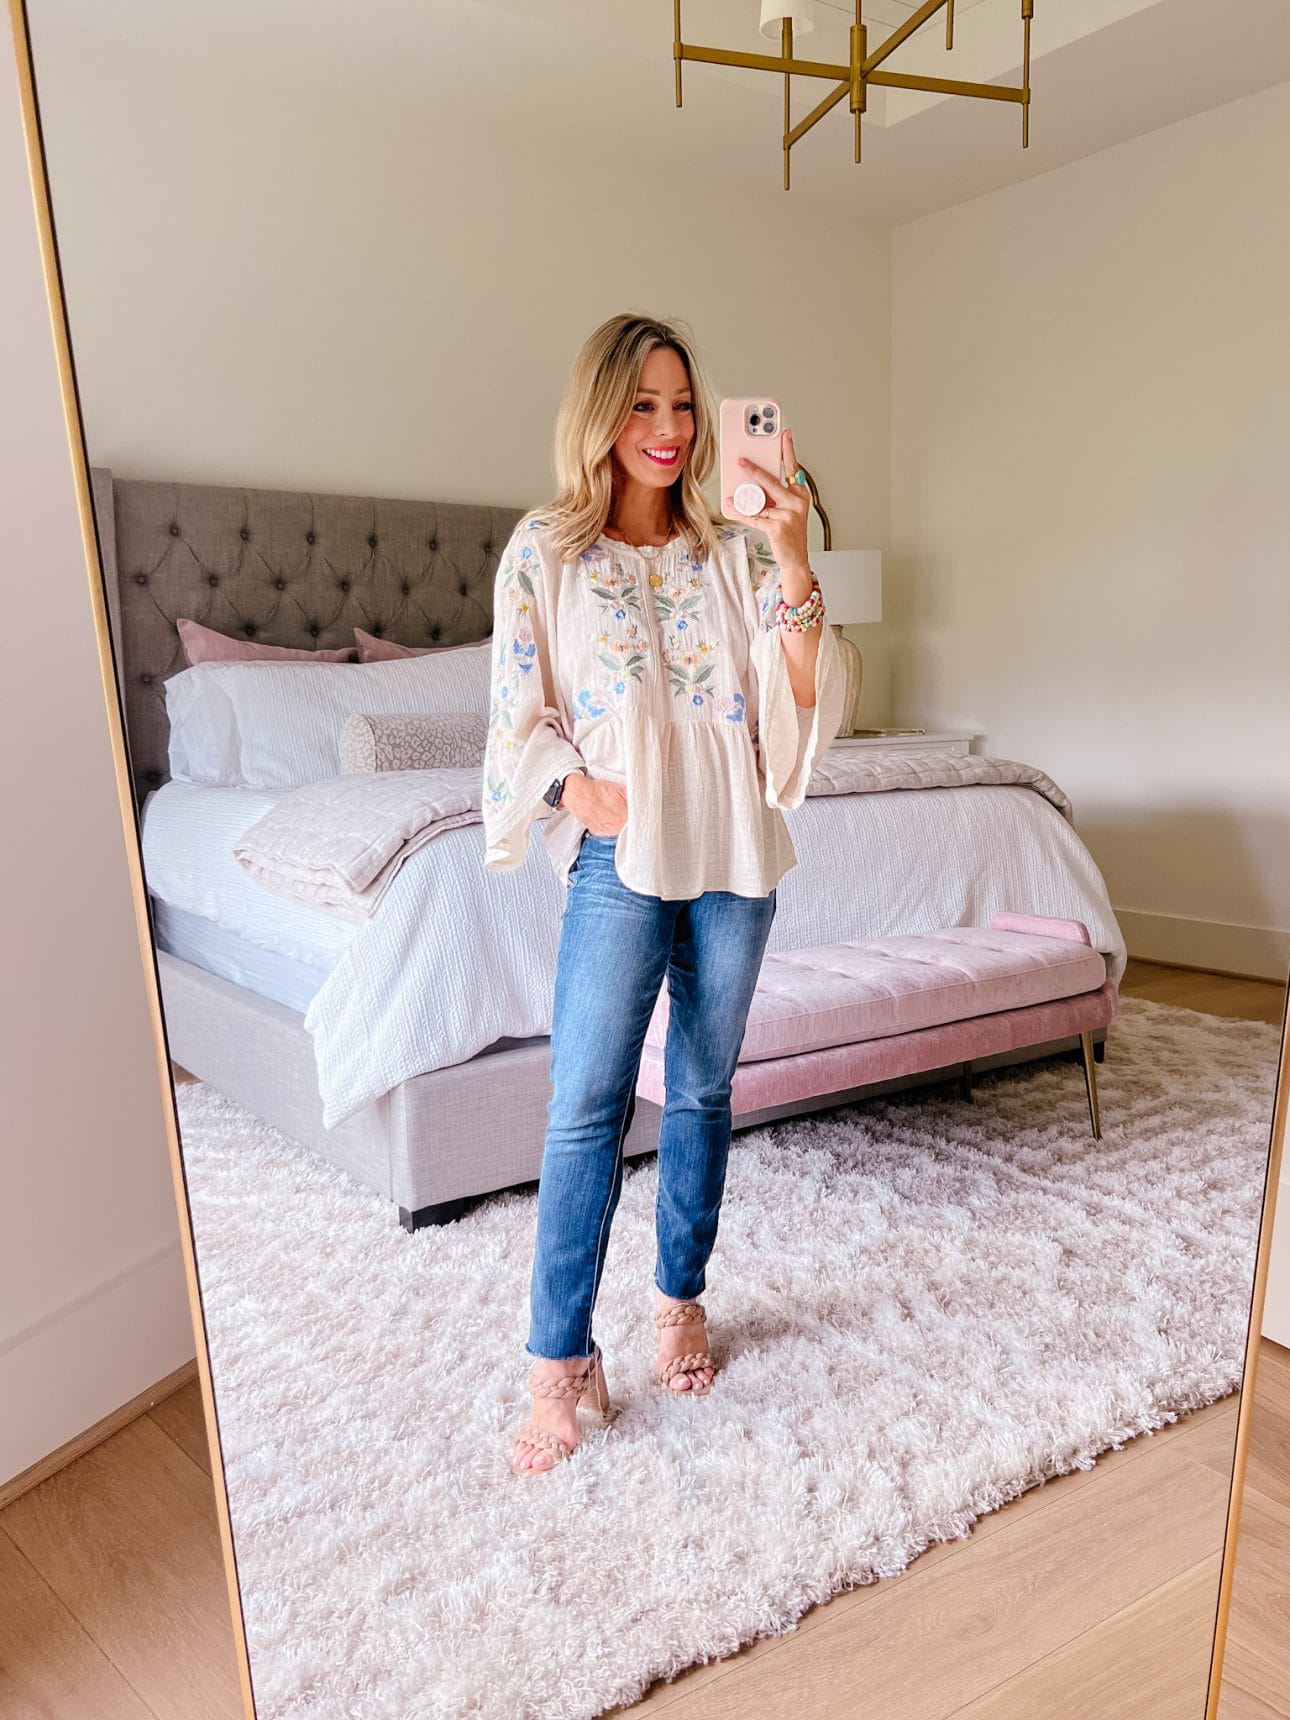 Boho Style Top, Jeans, Sandals